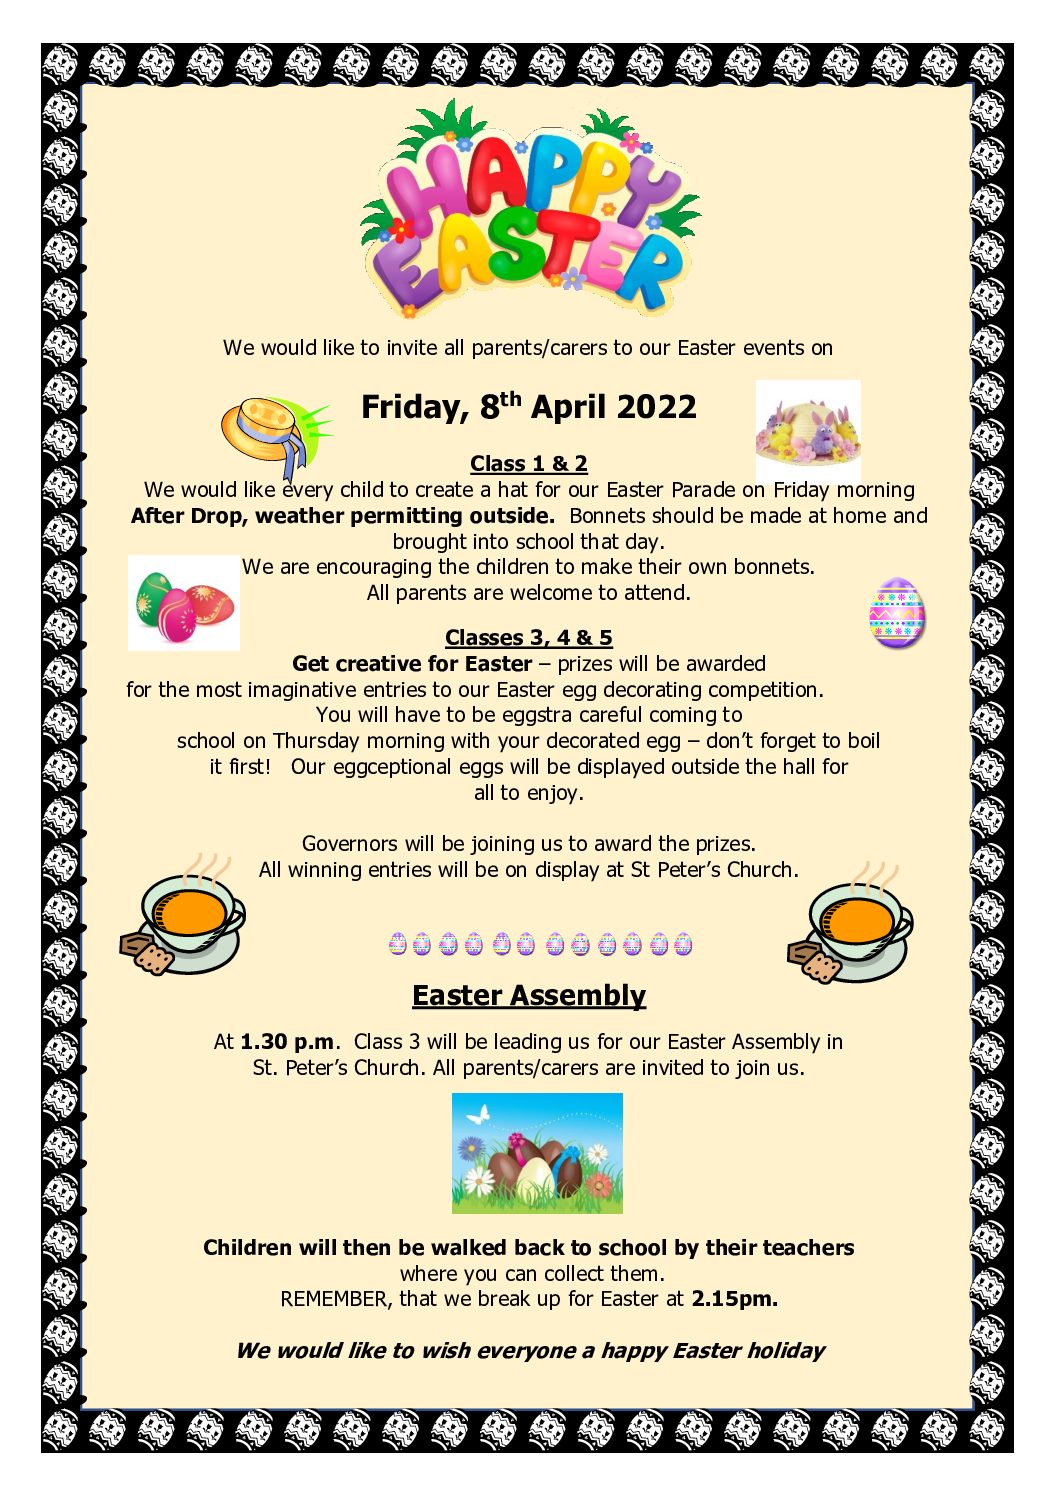 Easter Activities – Friday, 8th April 2022